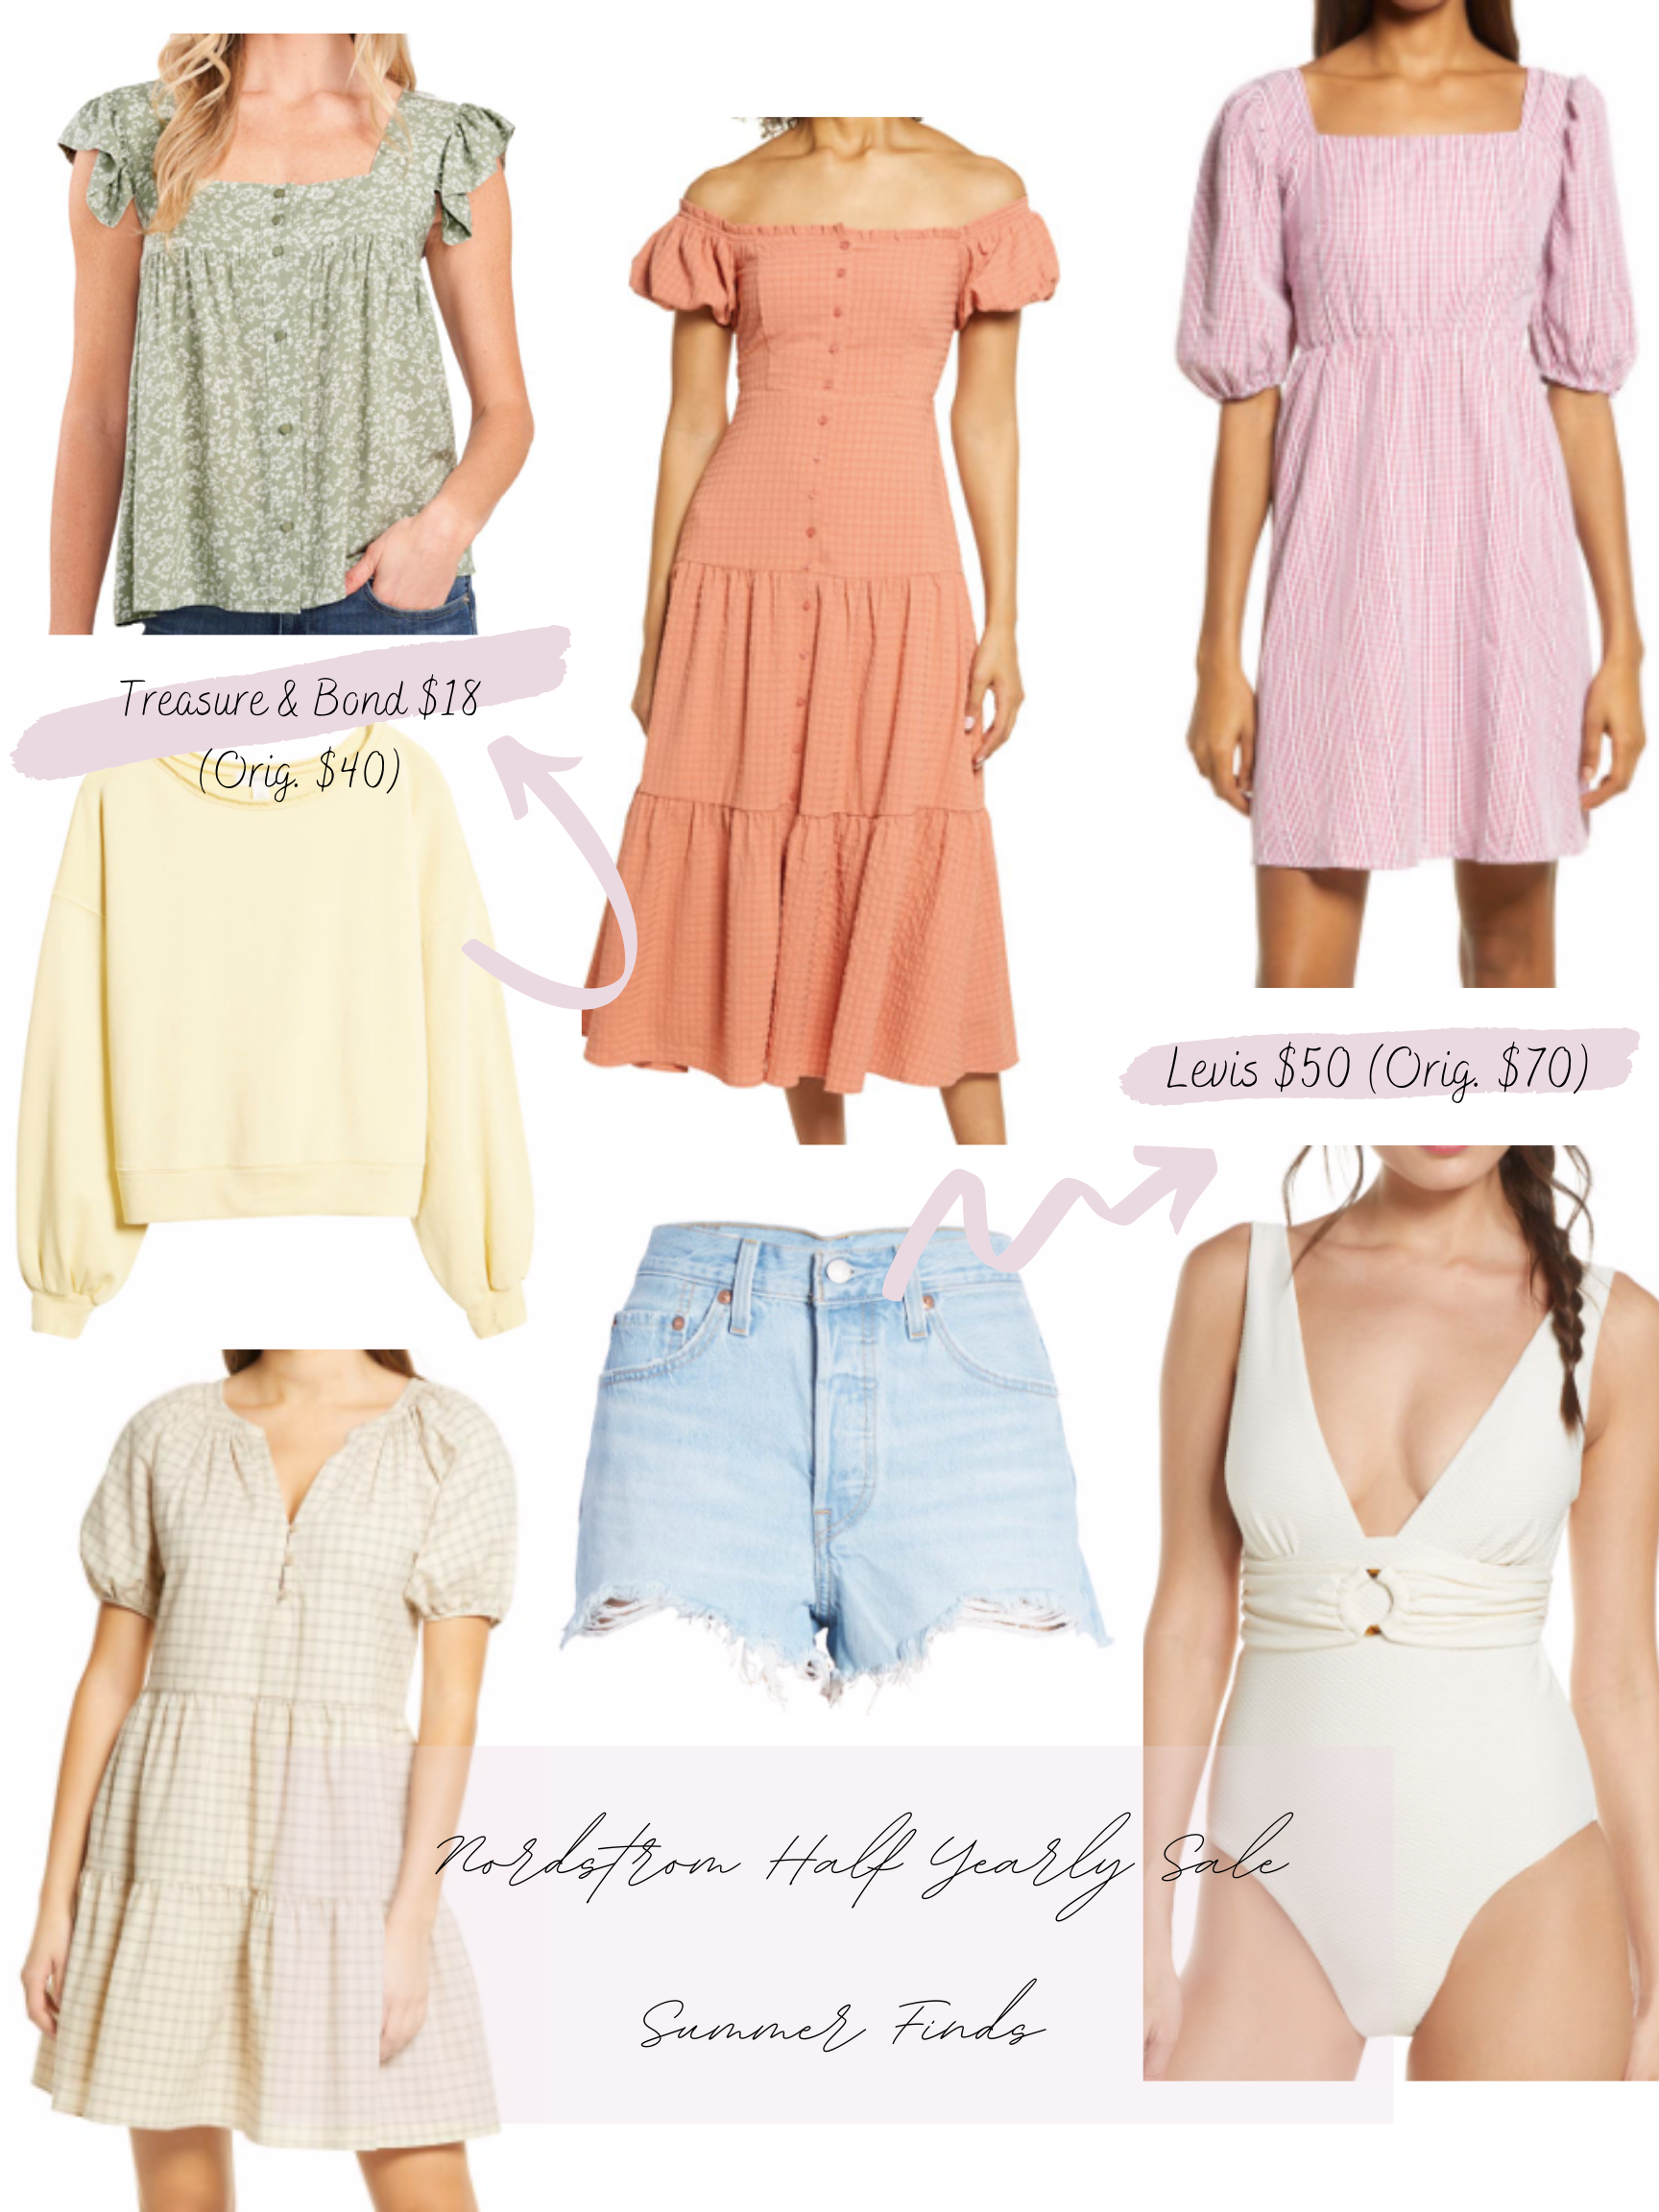 Best Of Nordstrom’s Half-Yearly Sale (Summer & Fall)